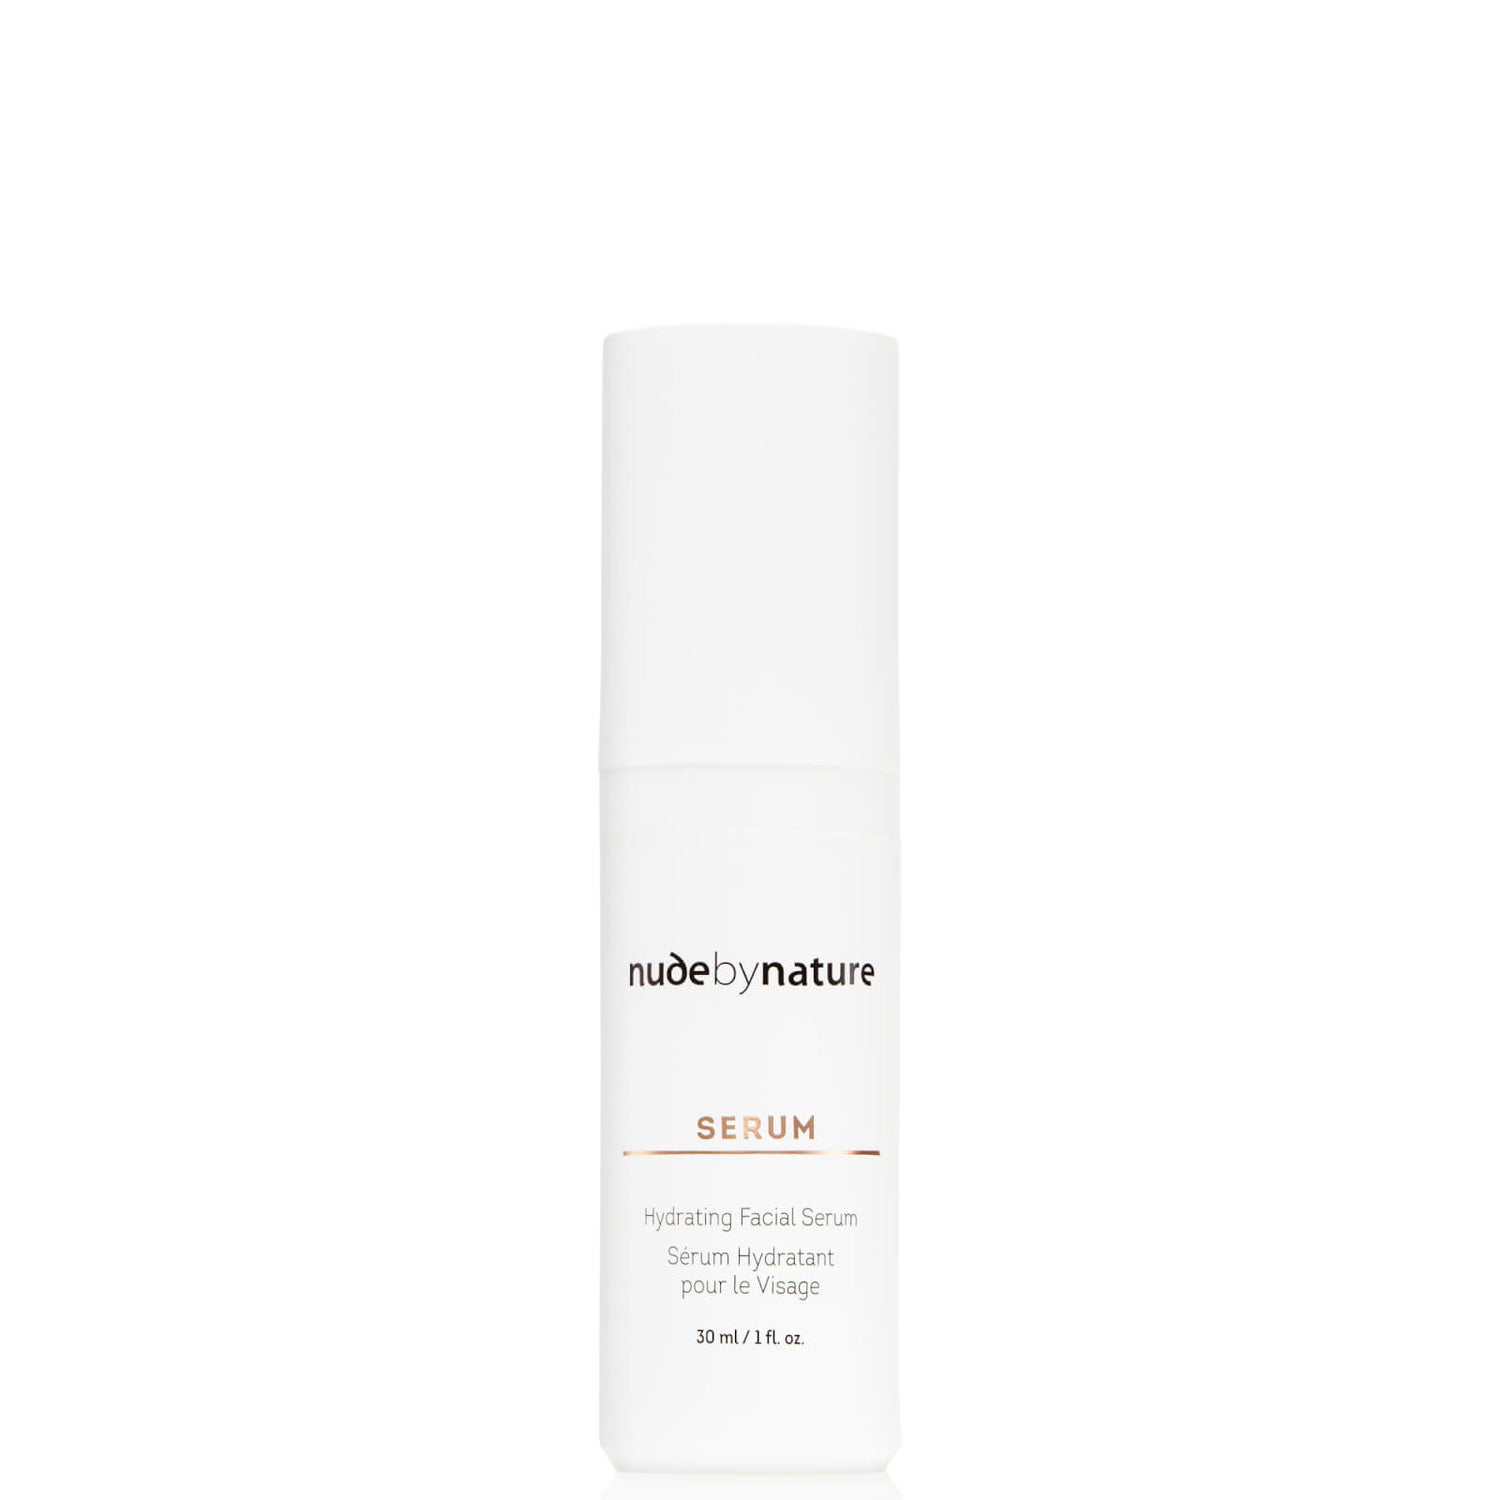 nude by nature Hydrating Facial Serum 30ml